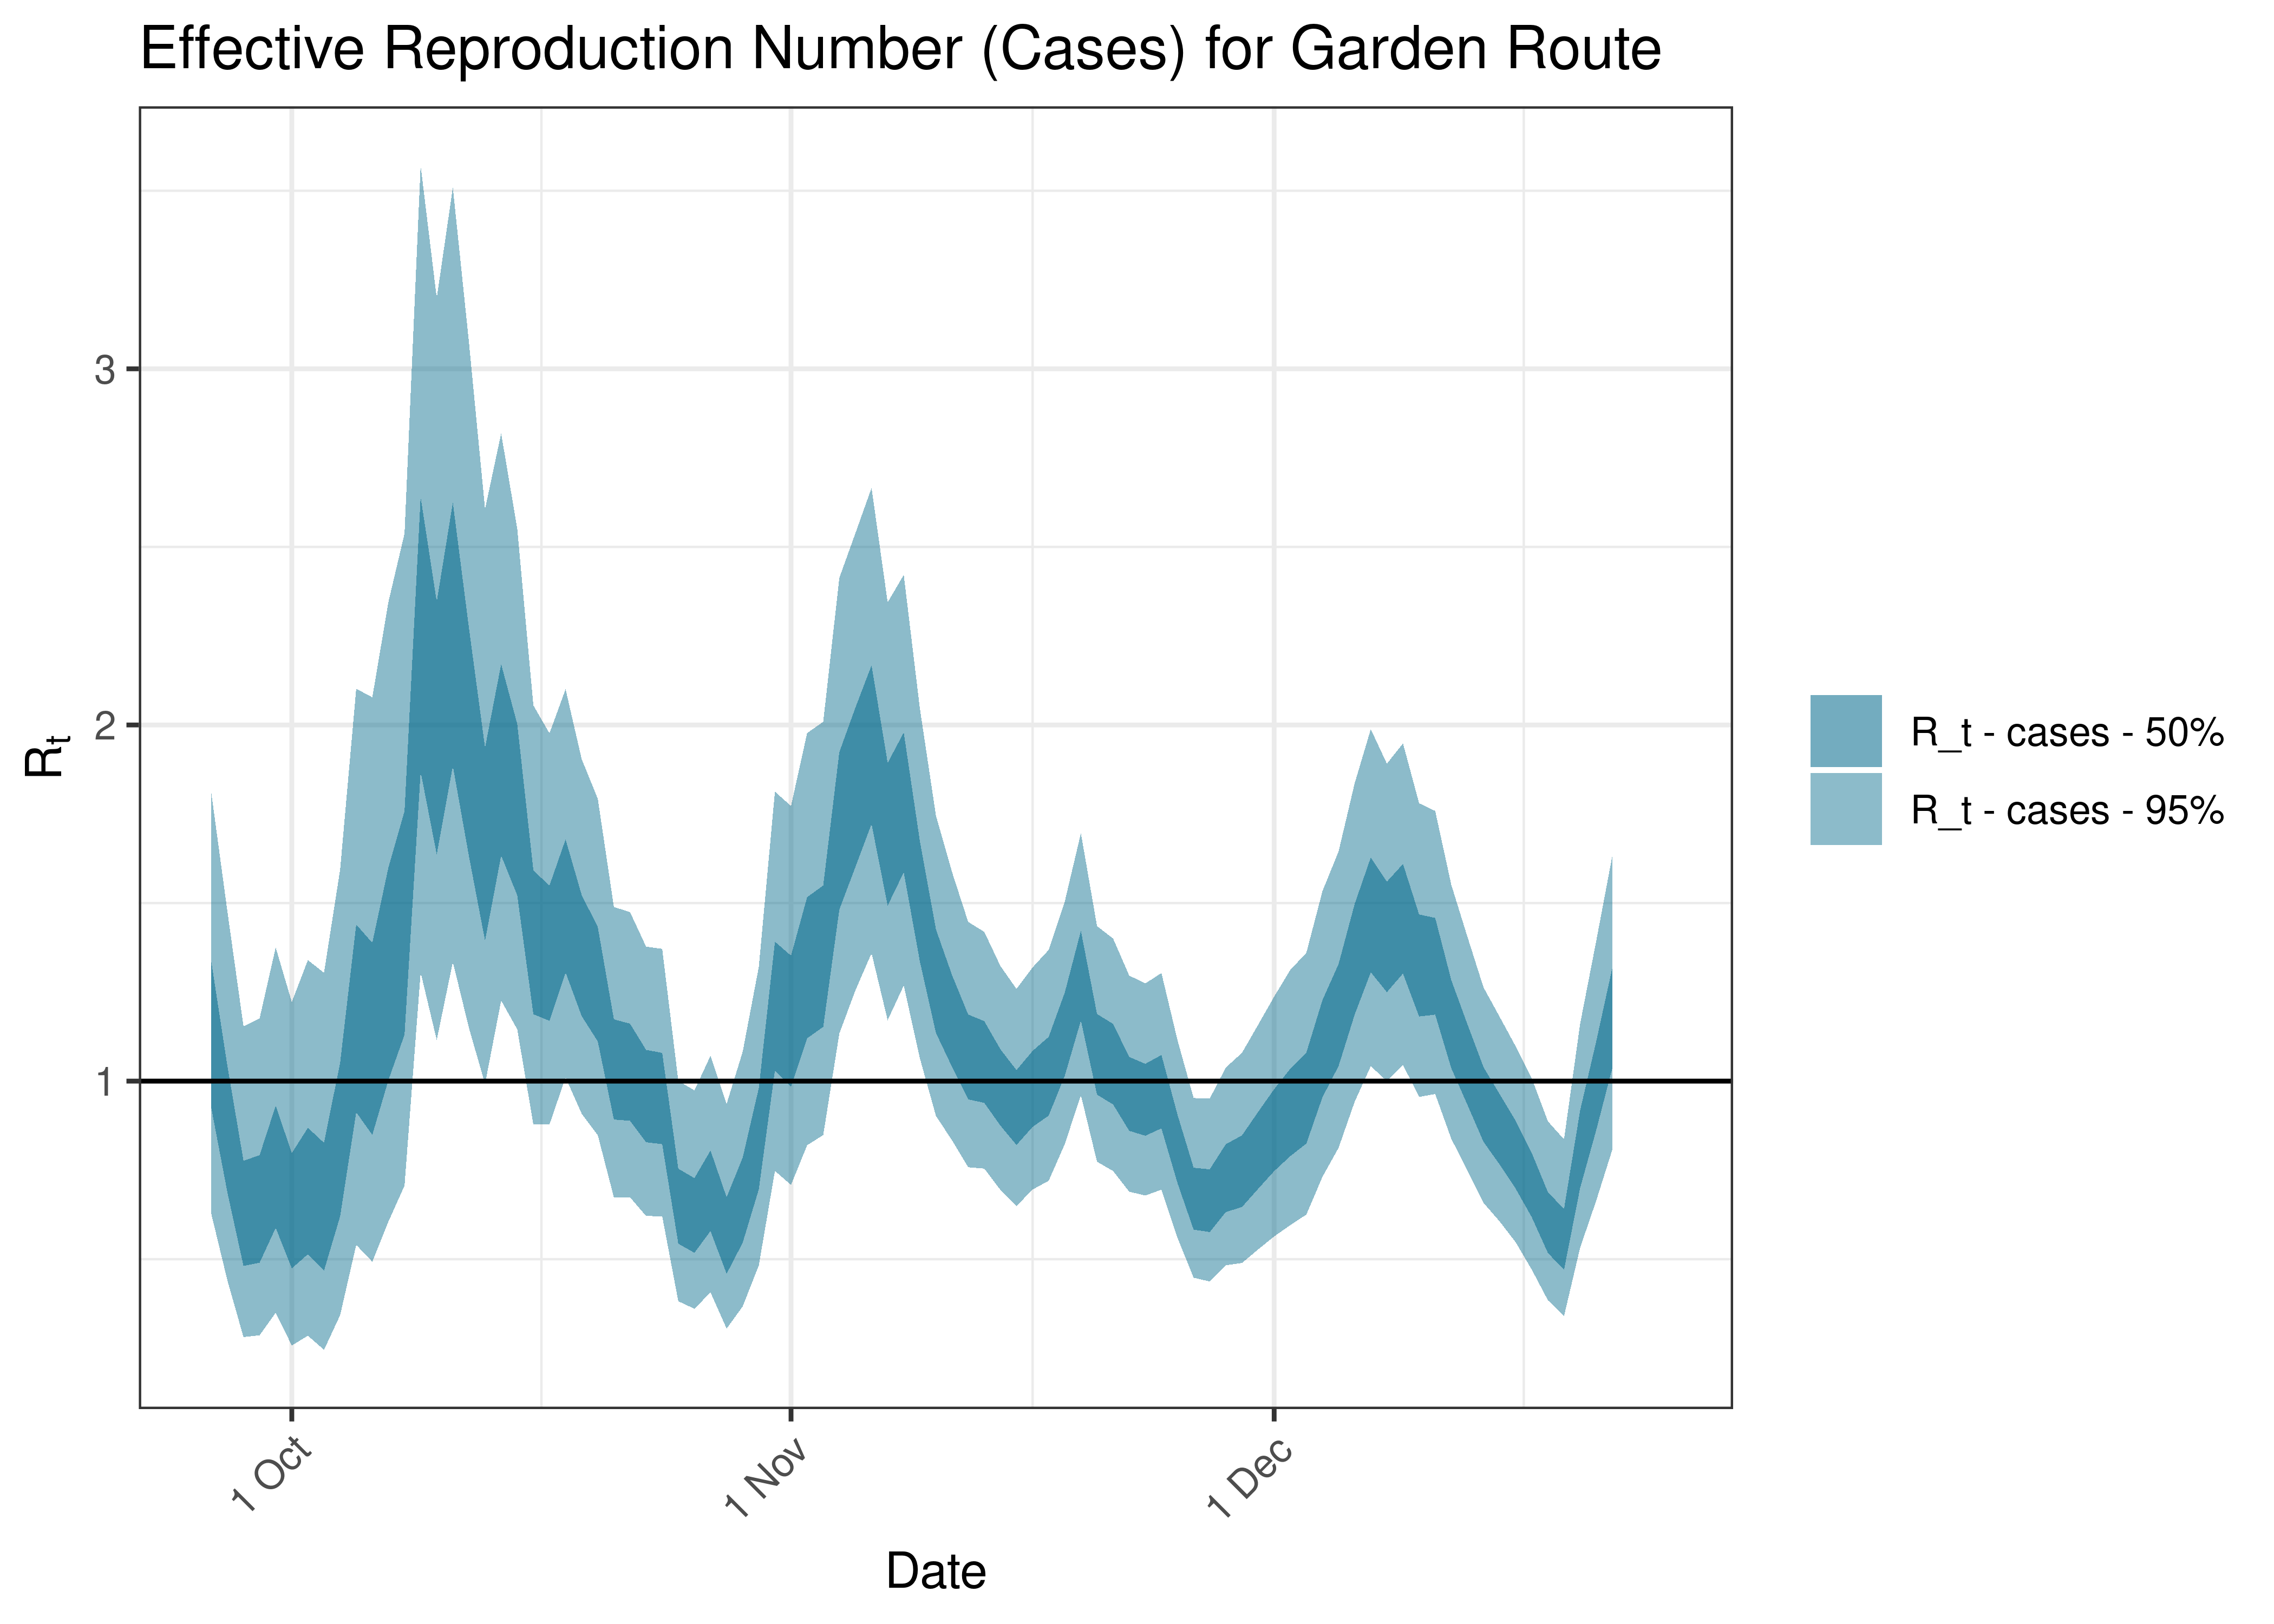 Estimated Effective Reproduction Number Based on Cases for Garden Route over last 90 days